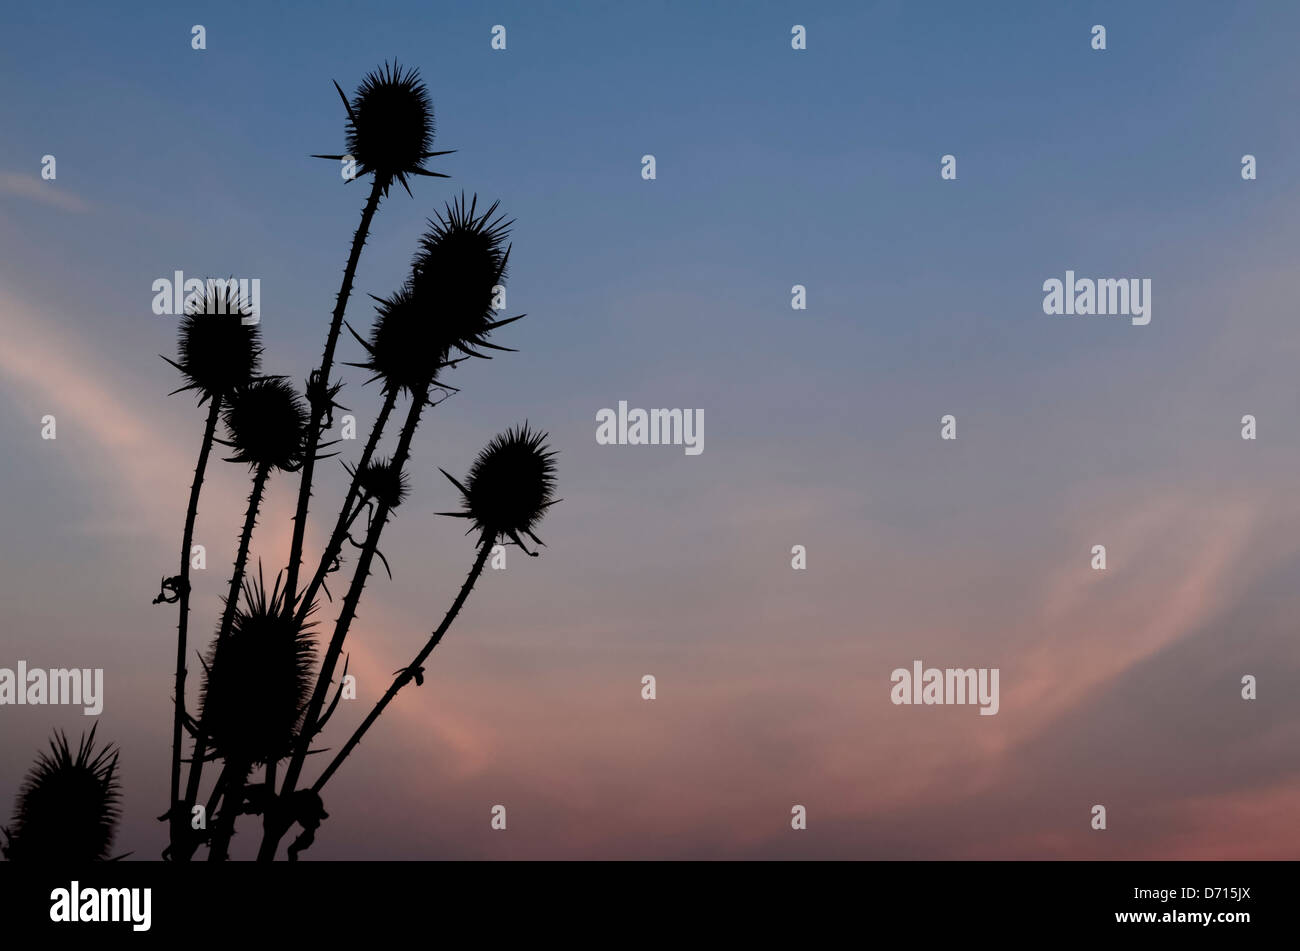 teasel silhouette at sunset Stock Photo